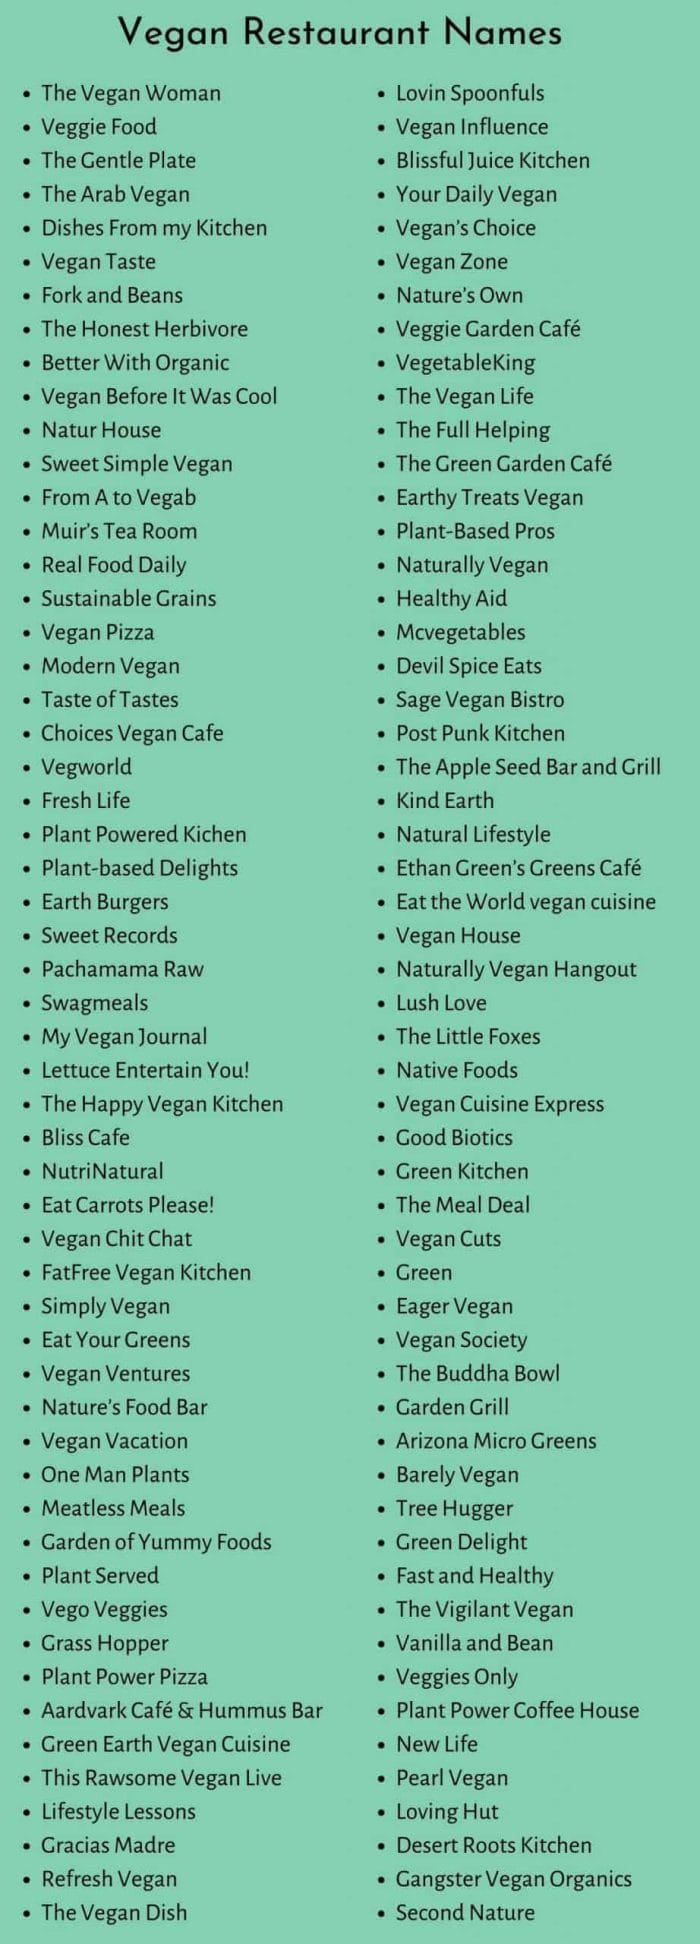  Catchy Vegan Restaurant Names Ideas And Suggestions - Vegan Food Business Name Ideas